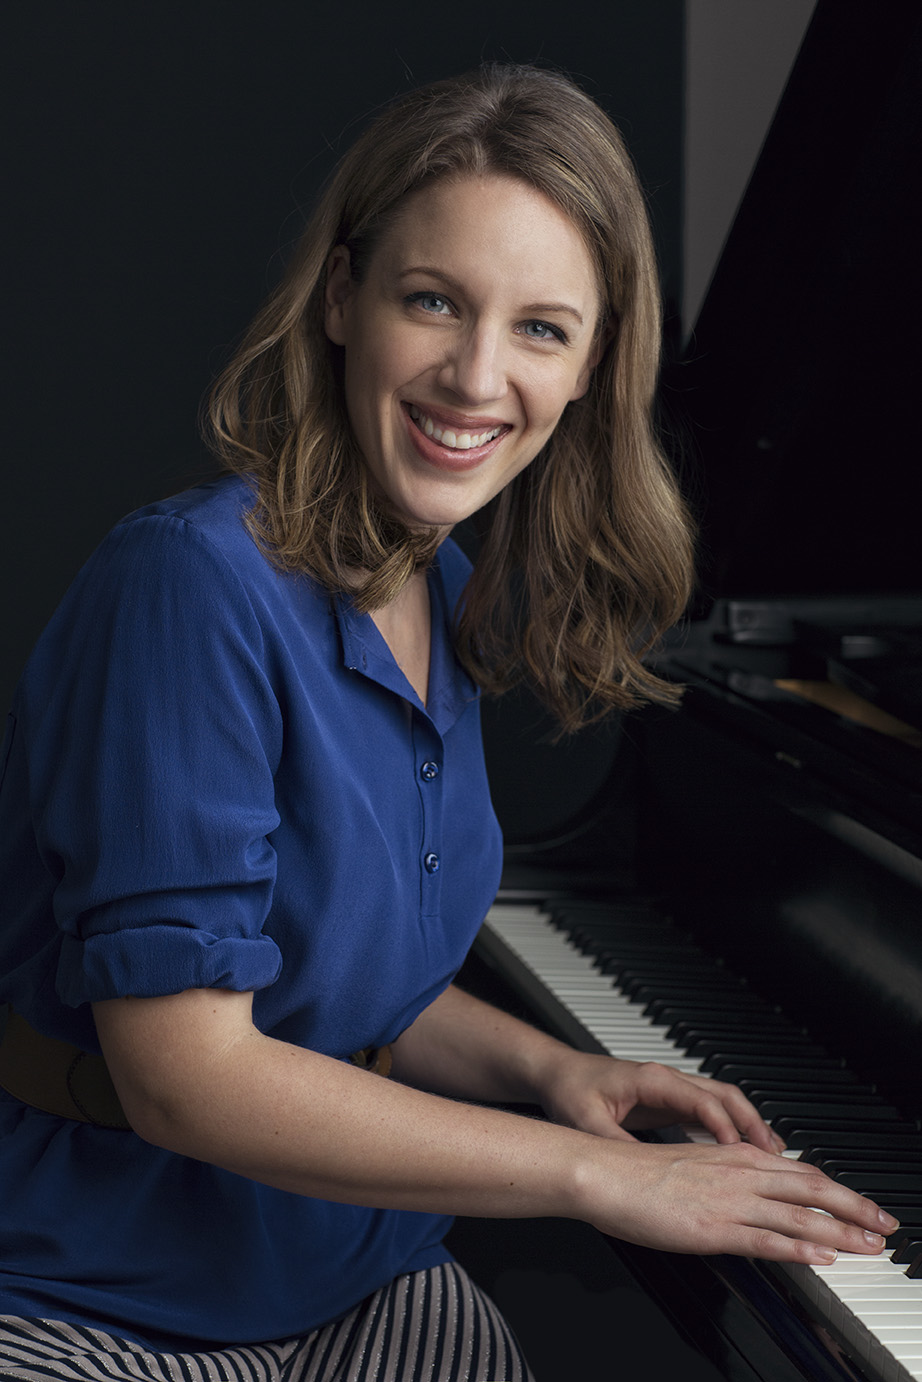 JESSIE MUELLER NAMED SARAH SIDDONS SOCIETY 2015 ACTRESS OF THE YEAR 1 The Sarah Siddons Society’s Artistic Director, Dominic Missimi, announced plans to bestow on Jessie Mueller the organization’s prestigious Actress of the Year Award. Ms. Mueller won a Tony award in 2014 for her performance as Carole King in BEAUTIFUL: THE CAROLE KING MUSICAL. The tribute, entitled SO BEAUTIFUL!, will take place on Monday, April 27, 7:30 pm at the Marriott Theatre in Lincolnshire. 